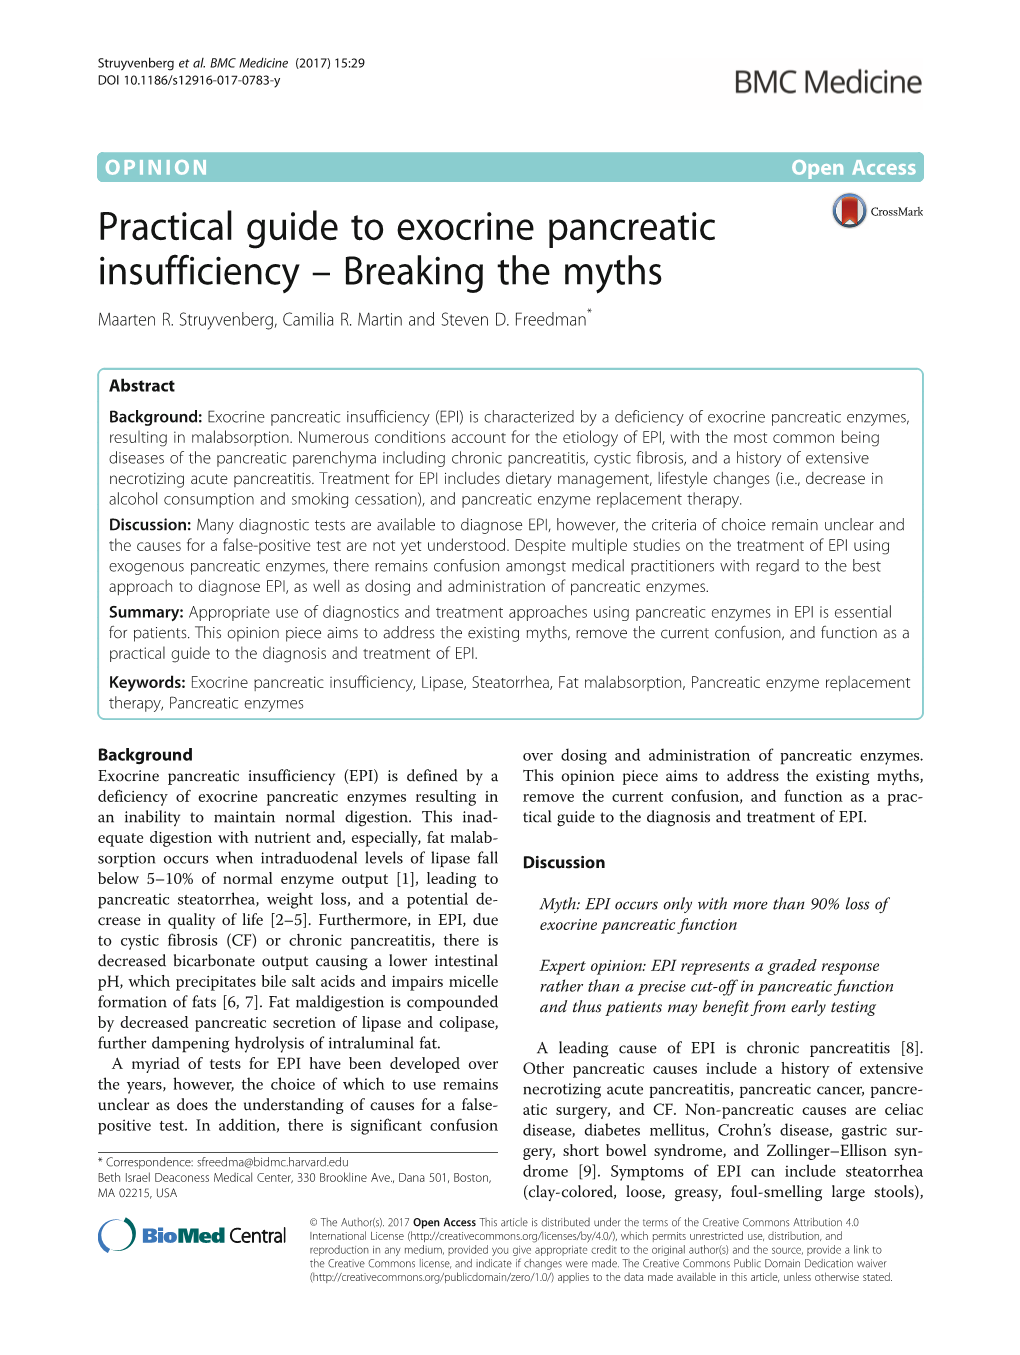 Practical Guide to Exocrine Pancreatic Insufficiency – Breaking the Myths Maarten R